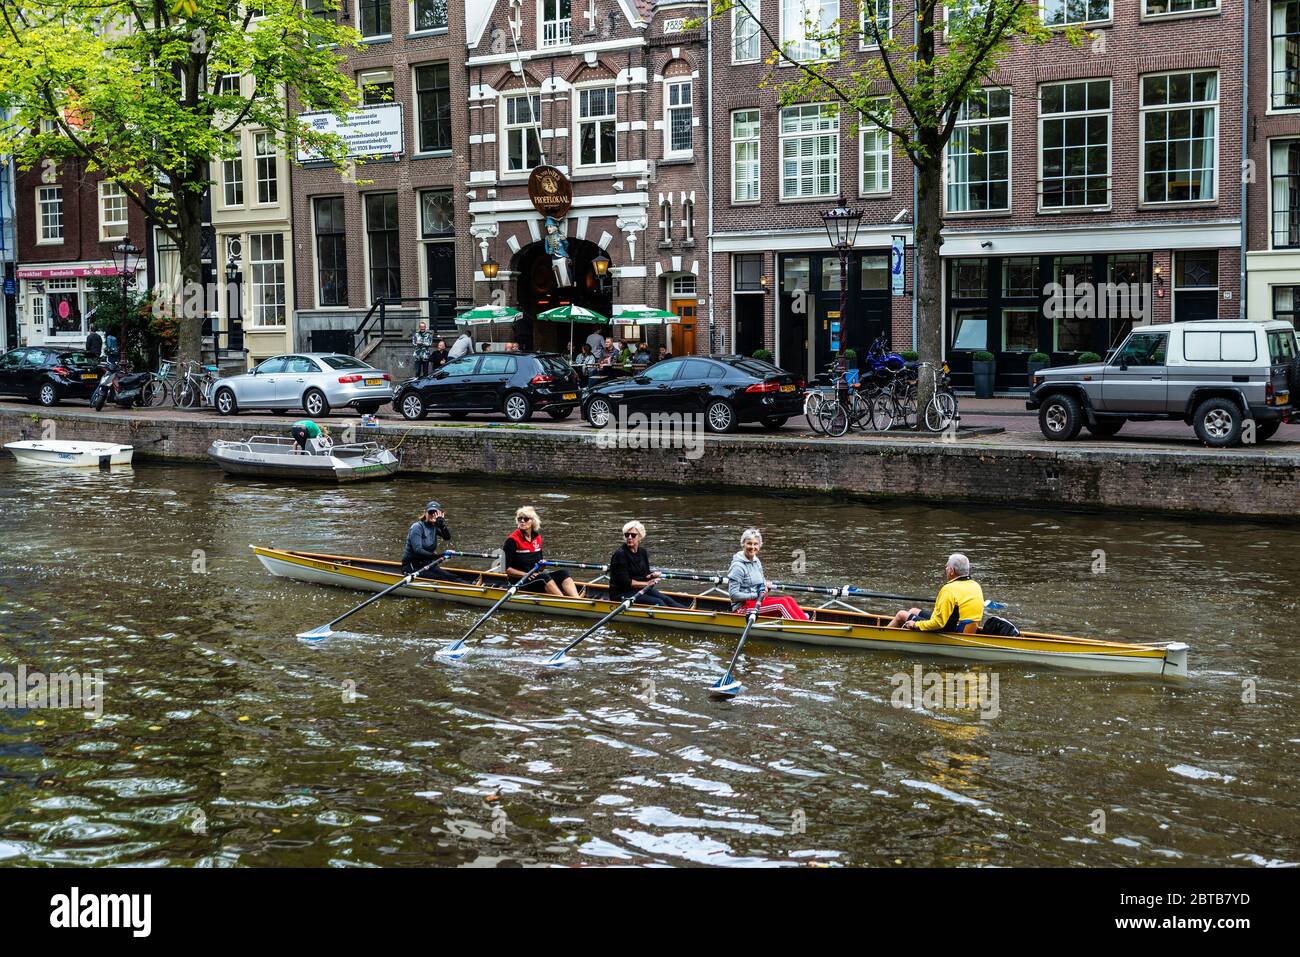 Amsterdam, Netherlands - September 8, 2018: Senior women rowing a recreational boat along of a canal in Amsterdam, Netherlands Stock Photo